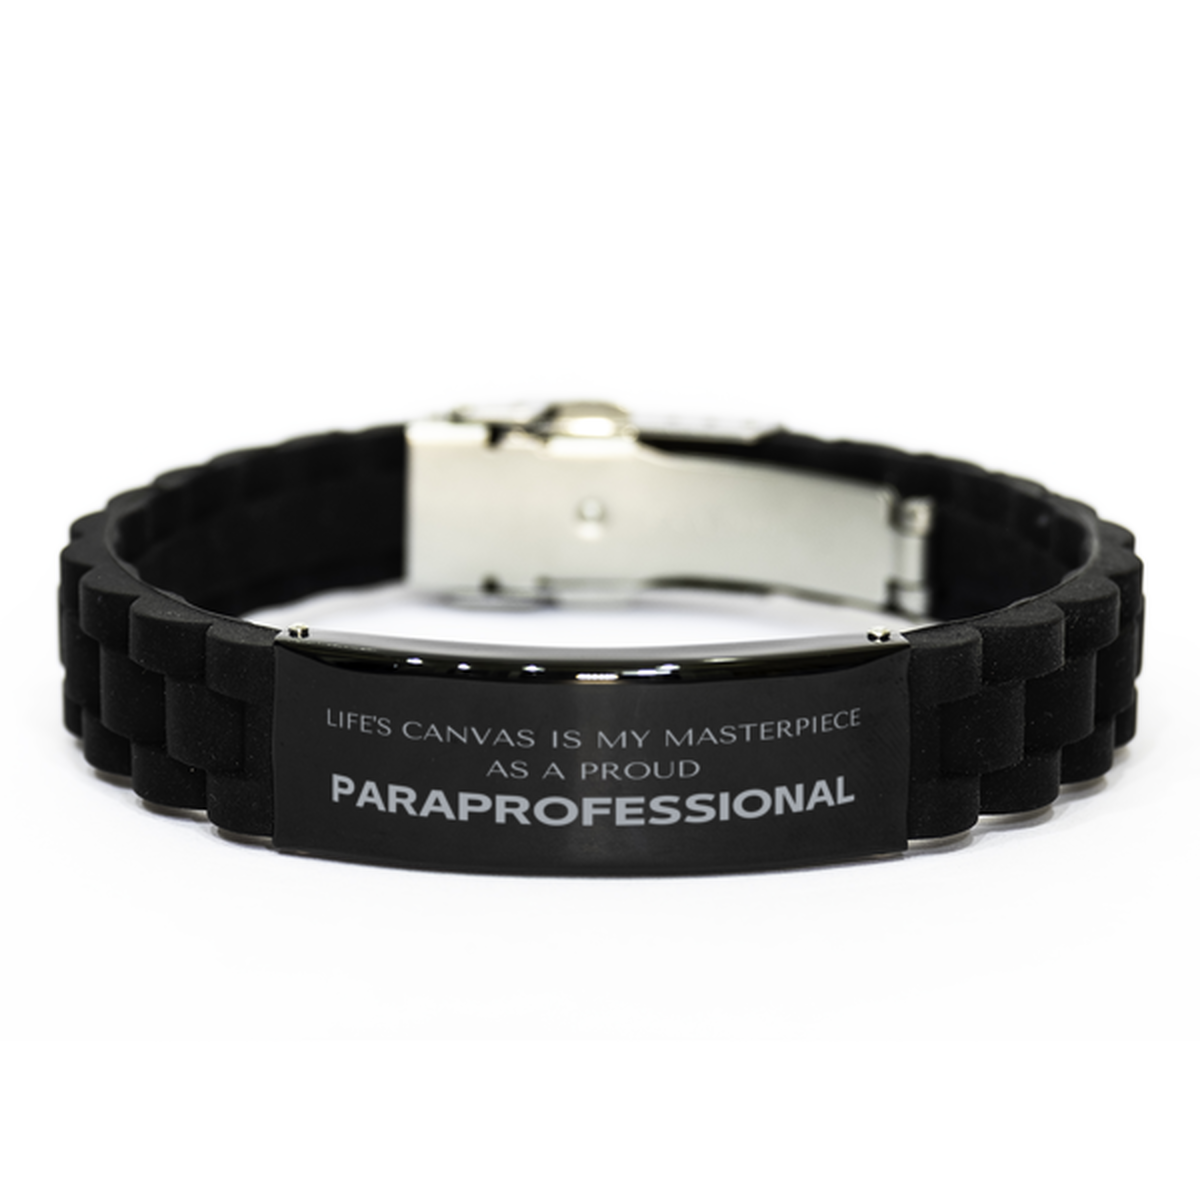 Proud Paraprofessional Gifts, Life's canvas is my masterpiece, Epic Birthday Christmas Unique Black Glidelock Clasp Bracelet For Paraprofessional, Coworkers, Men, Women, Friends